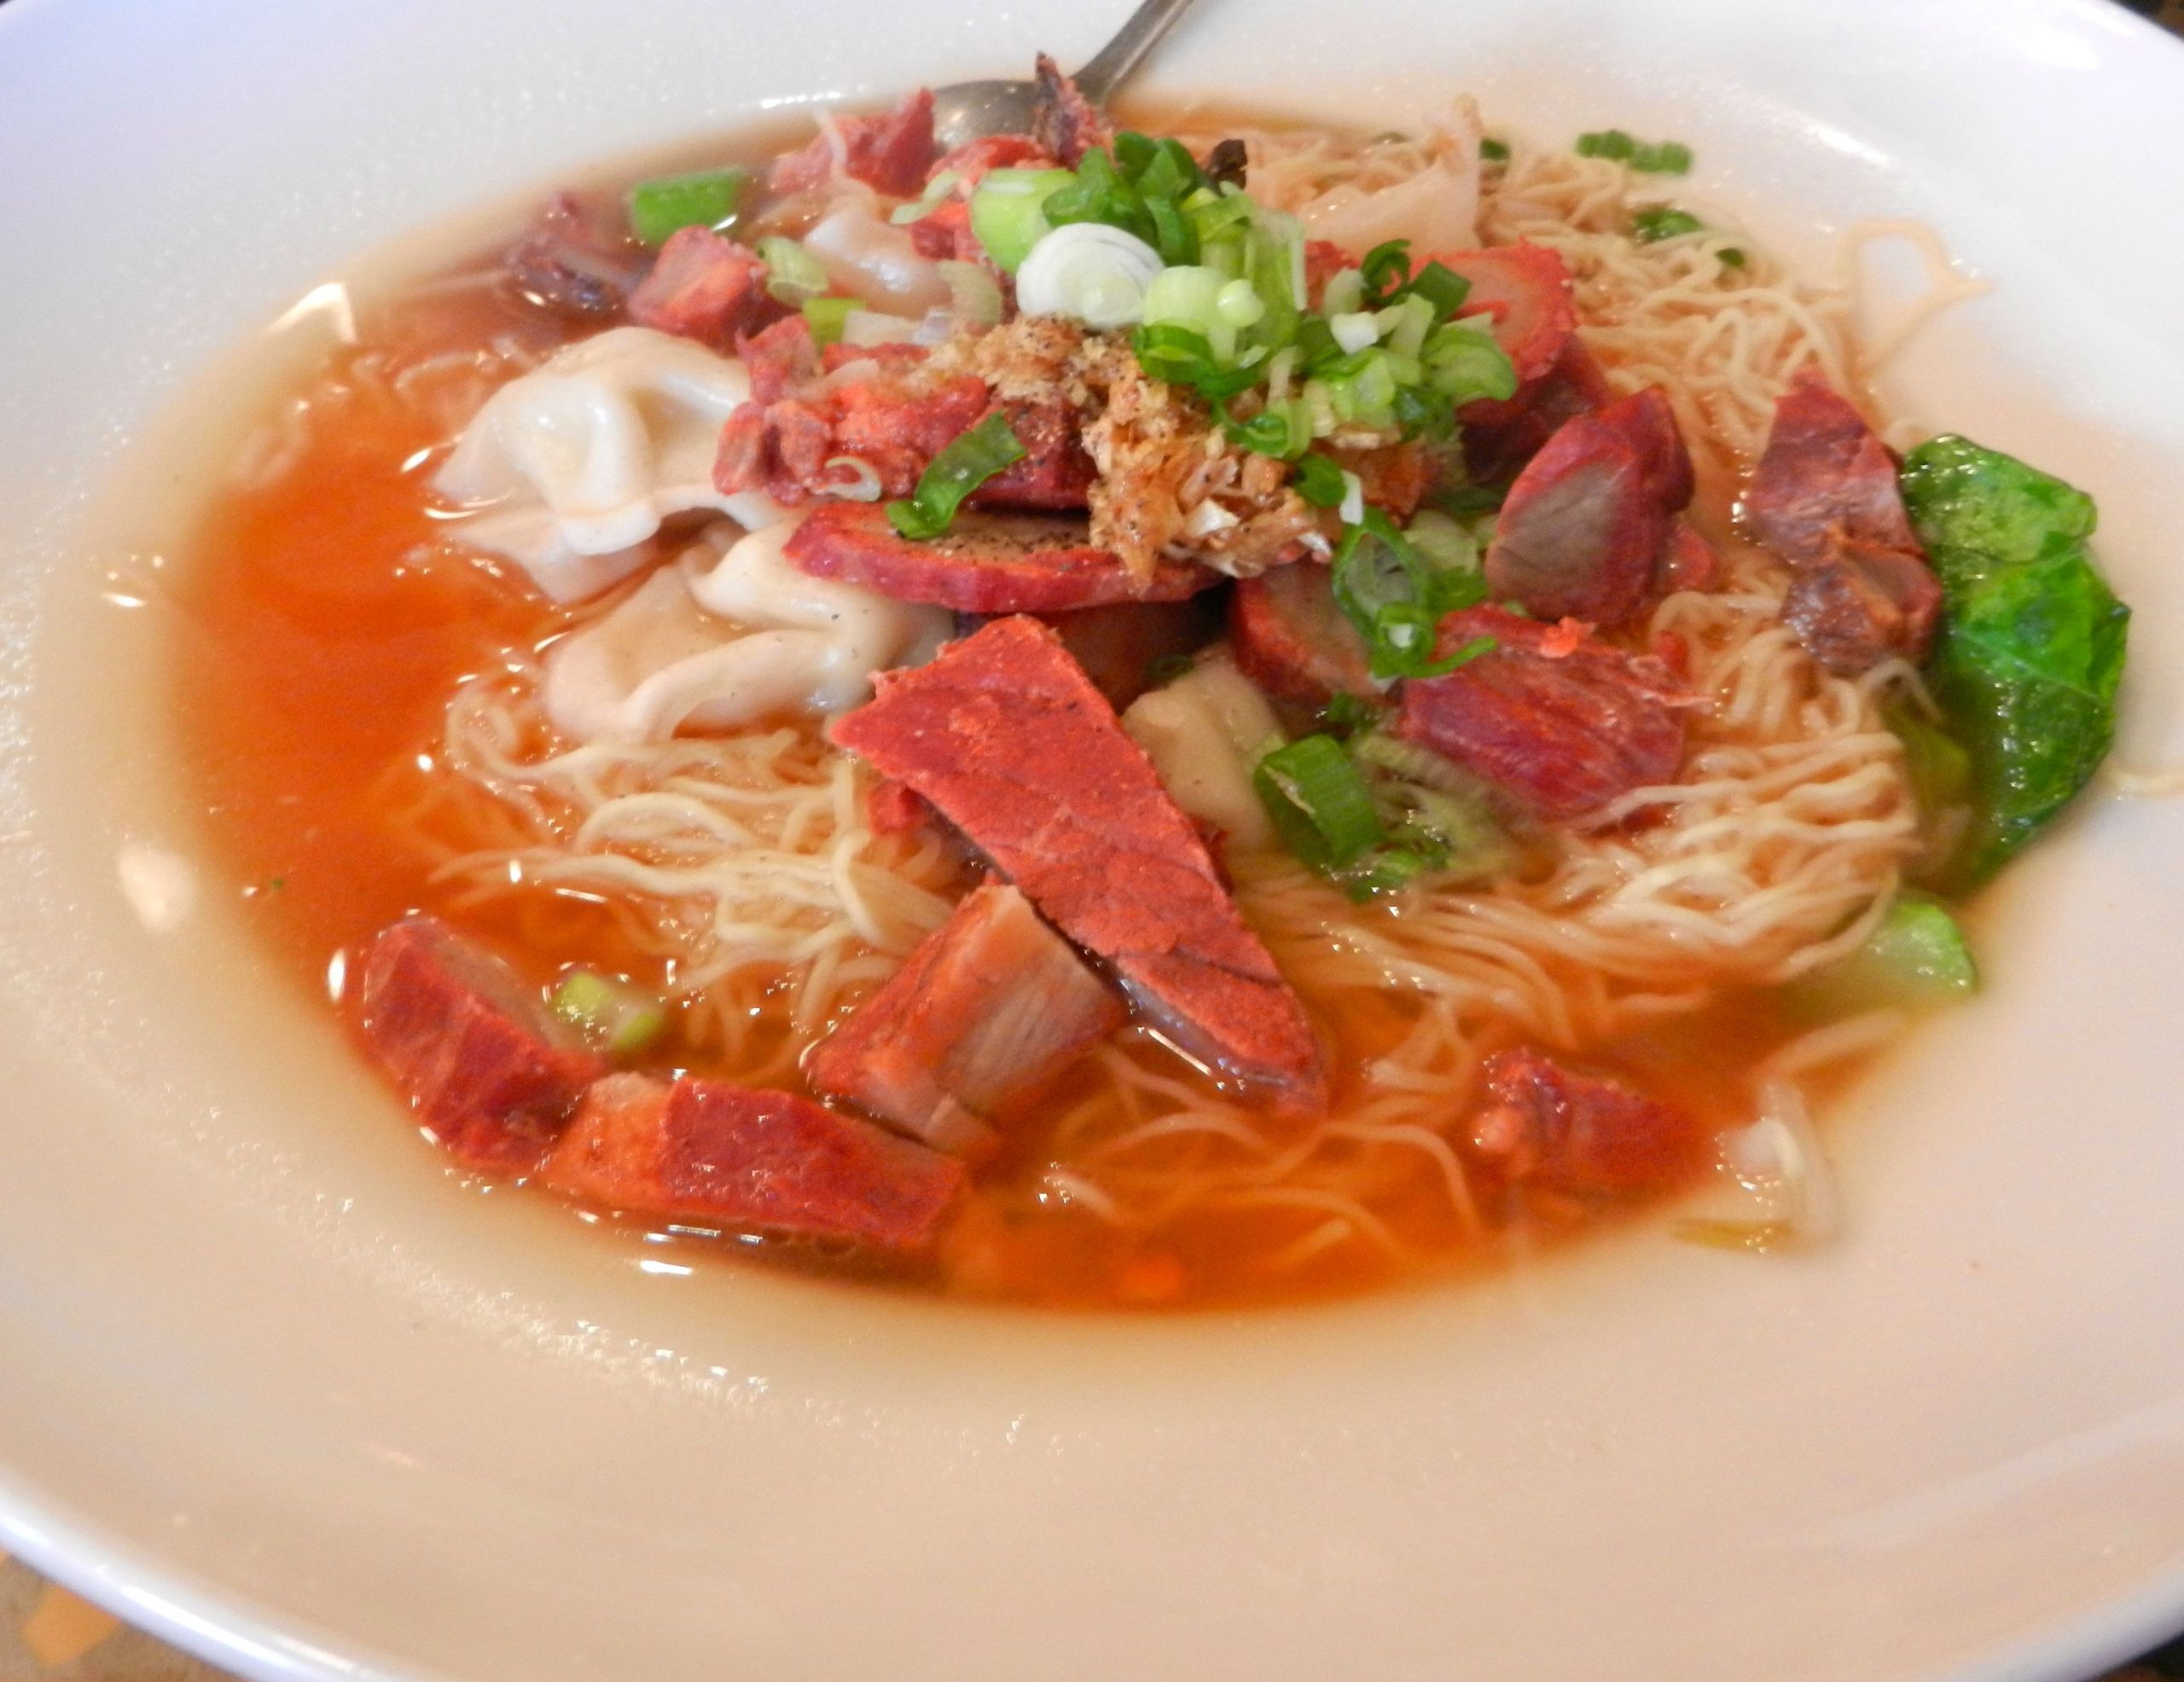 Cozy Noodles Evanston
 Pin on Restaurants Out and About